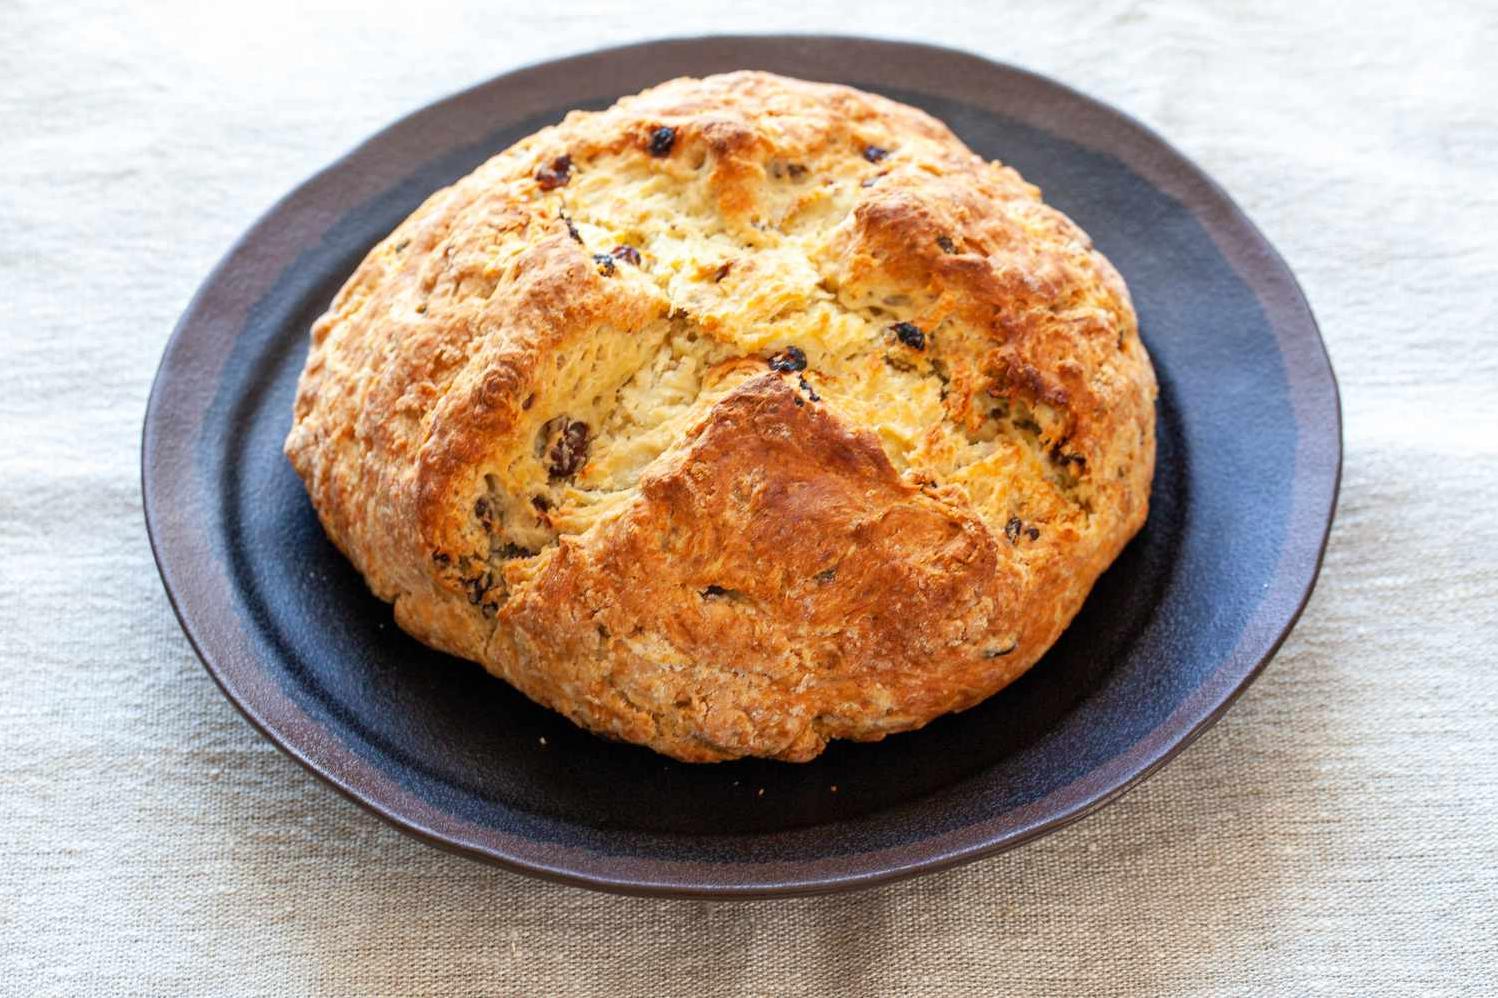  The rustic texture of this Irish soda bread is a delicious contrast to its smooth, buttery flavor.